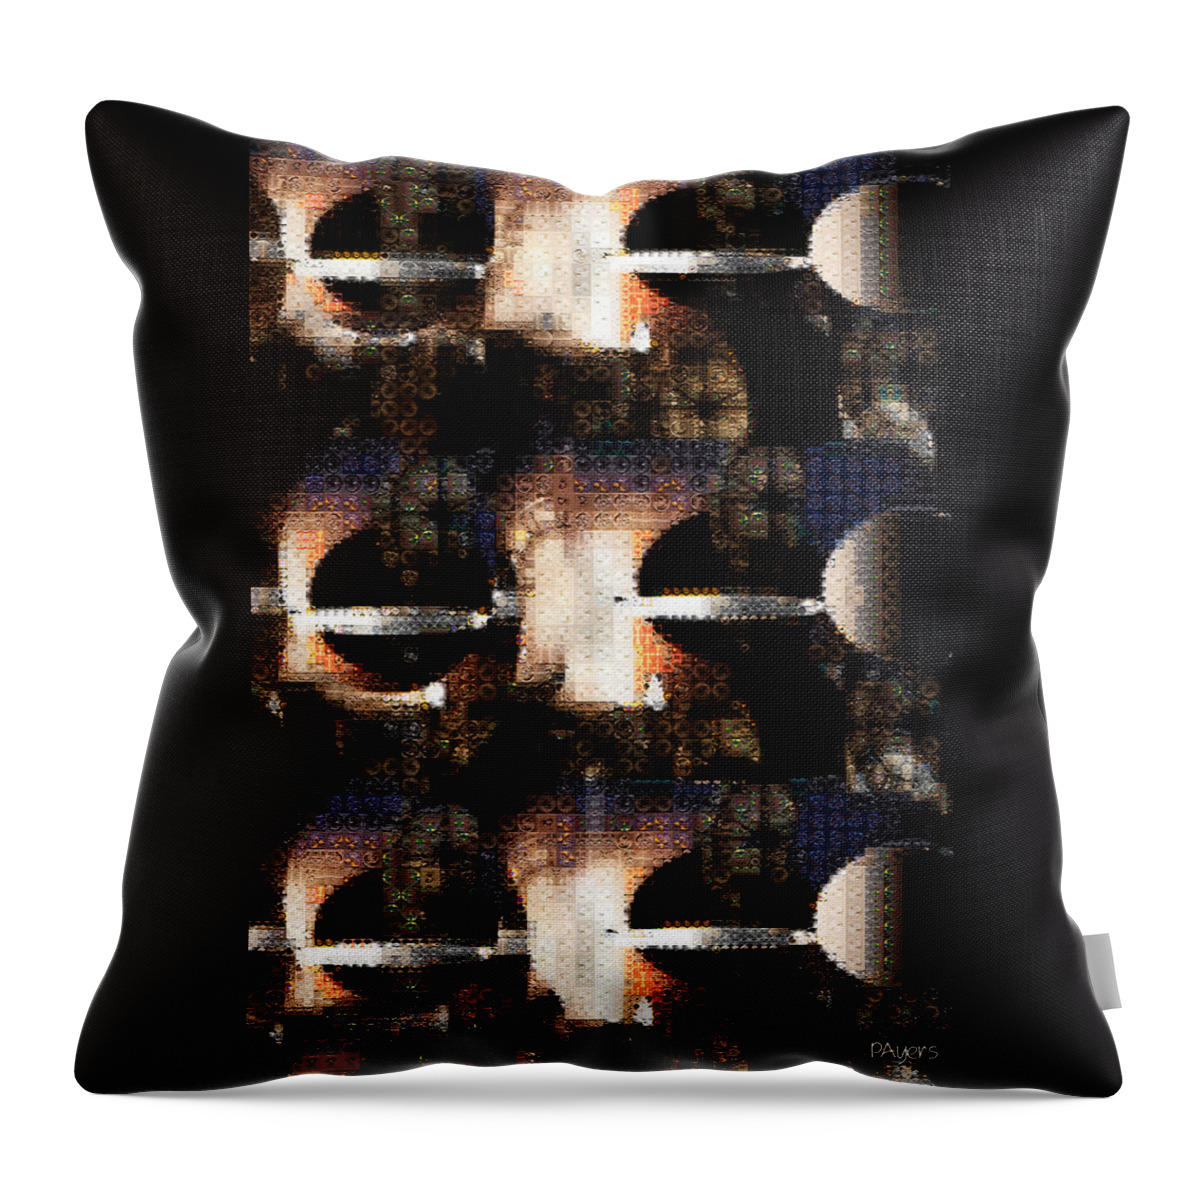 Paula Ayers Throw Pillow featuring the digital art Dimensions by Paula Ayers